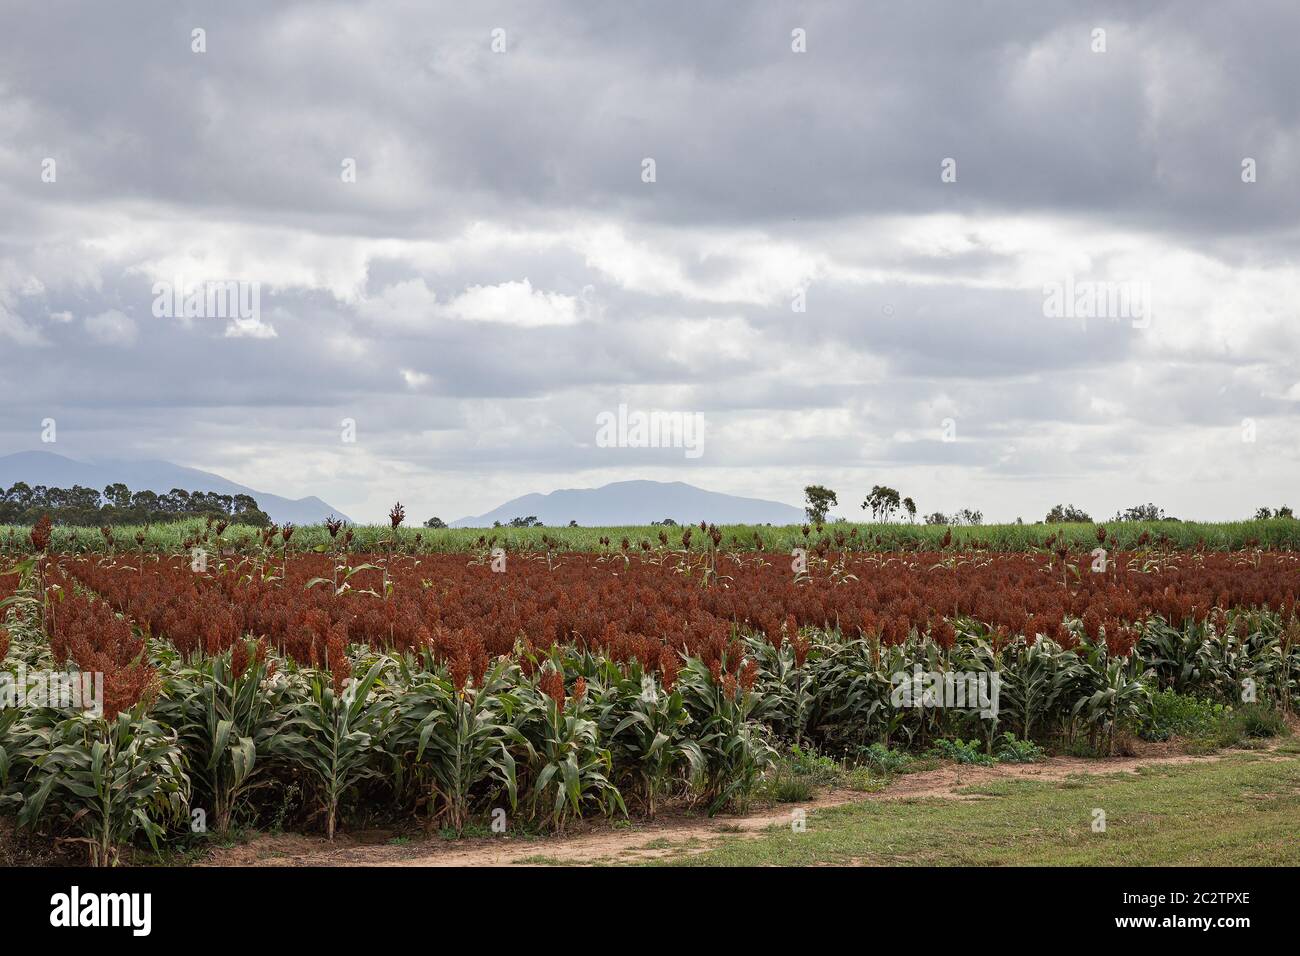 Field of sorghum with overcast sky and mountain in background. Stock Photo